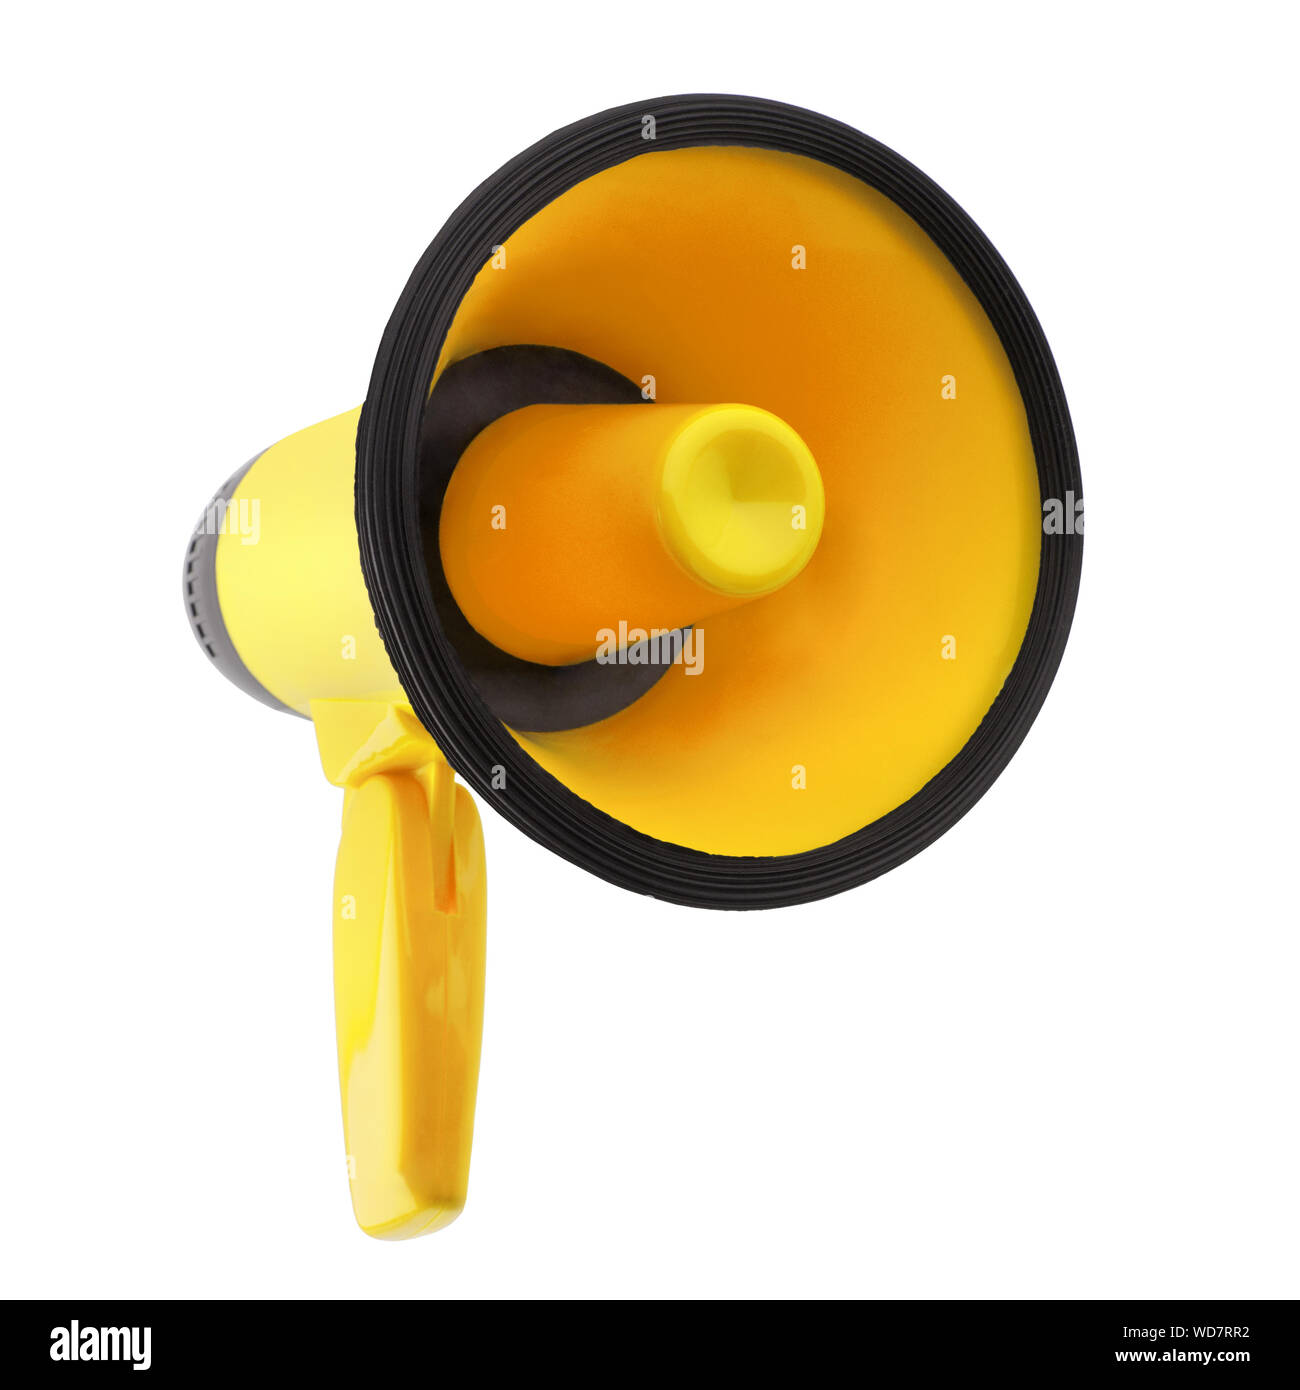 Yellow megaphone on white background isolated close-up, hand loudspeaker design, loud-hailer or speaking trumpet yellow press symbol gutter press sign Stock Photo